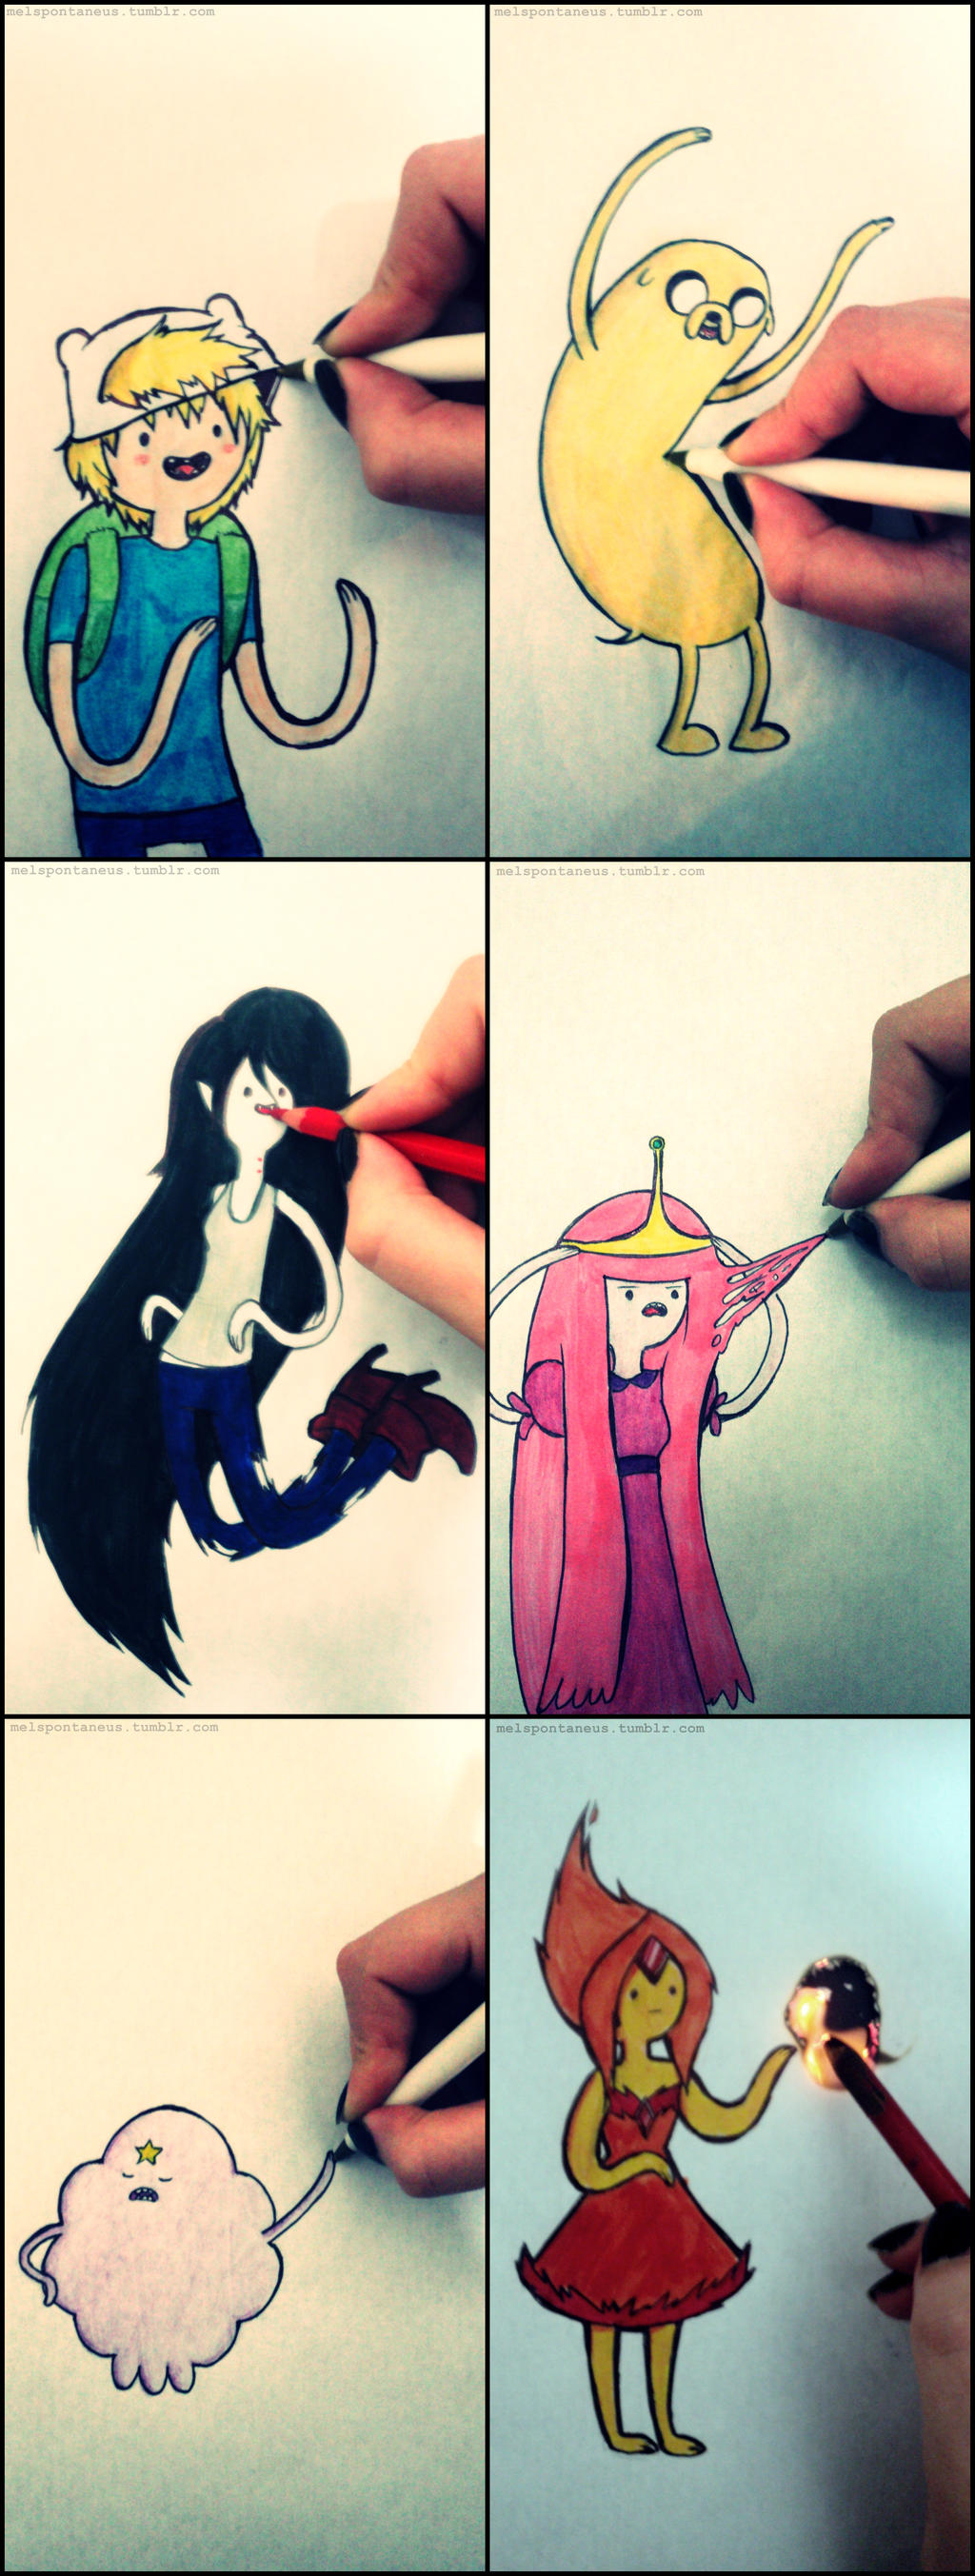 Playing with Adventure Time characters